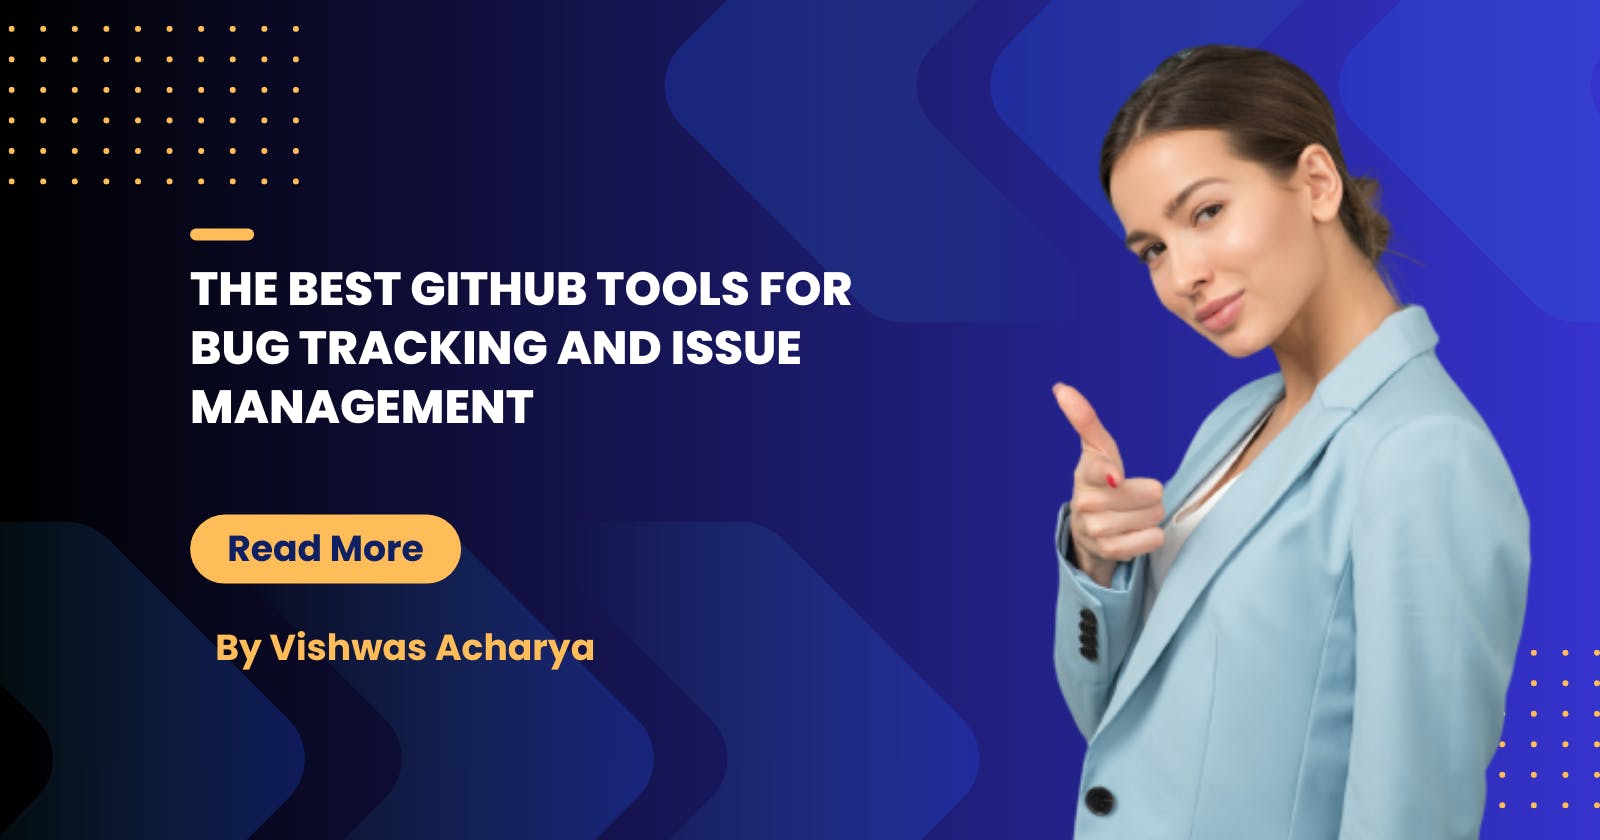 The Best GitHub Tools for Bug Tracking and Issue Management